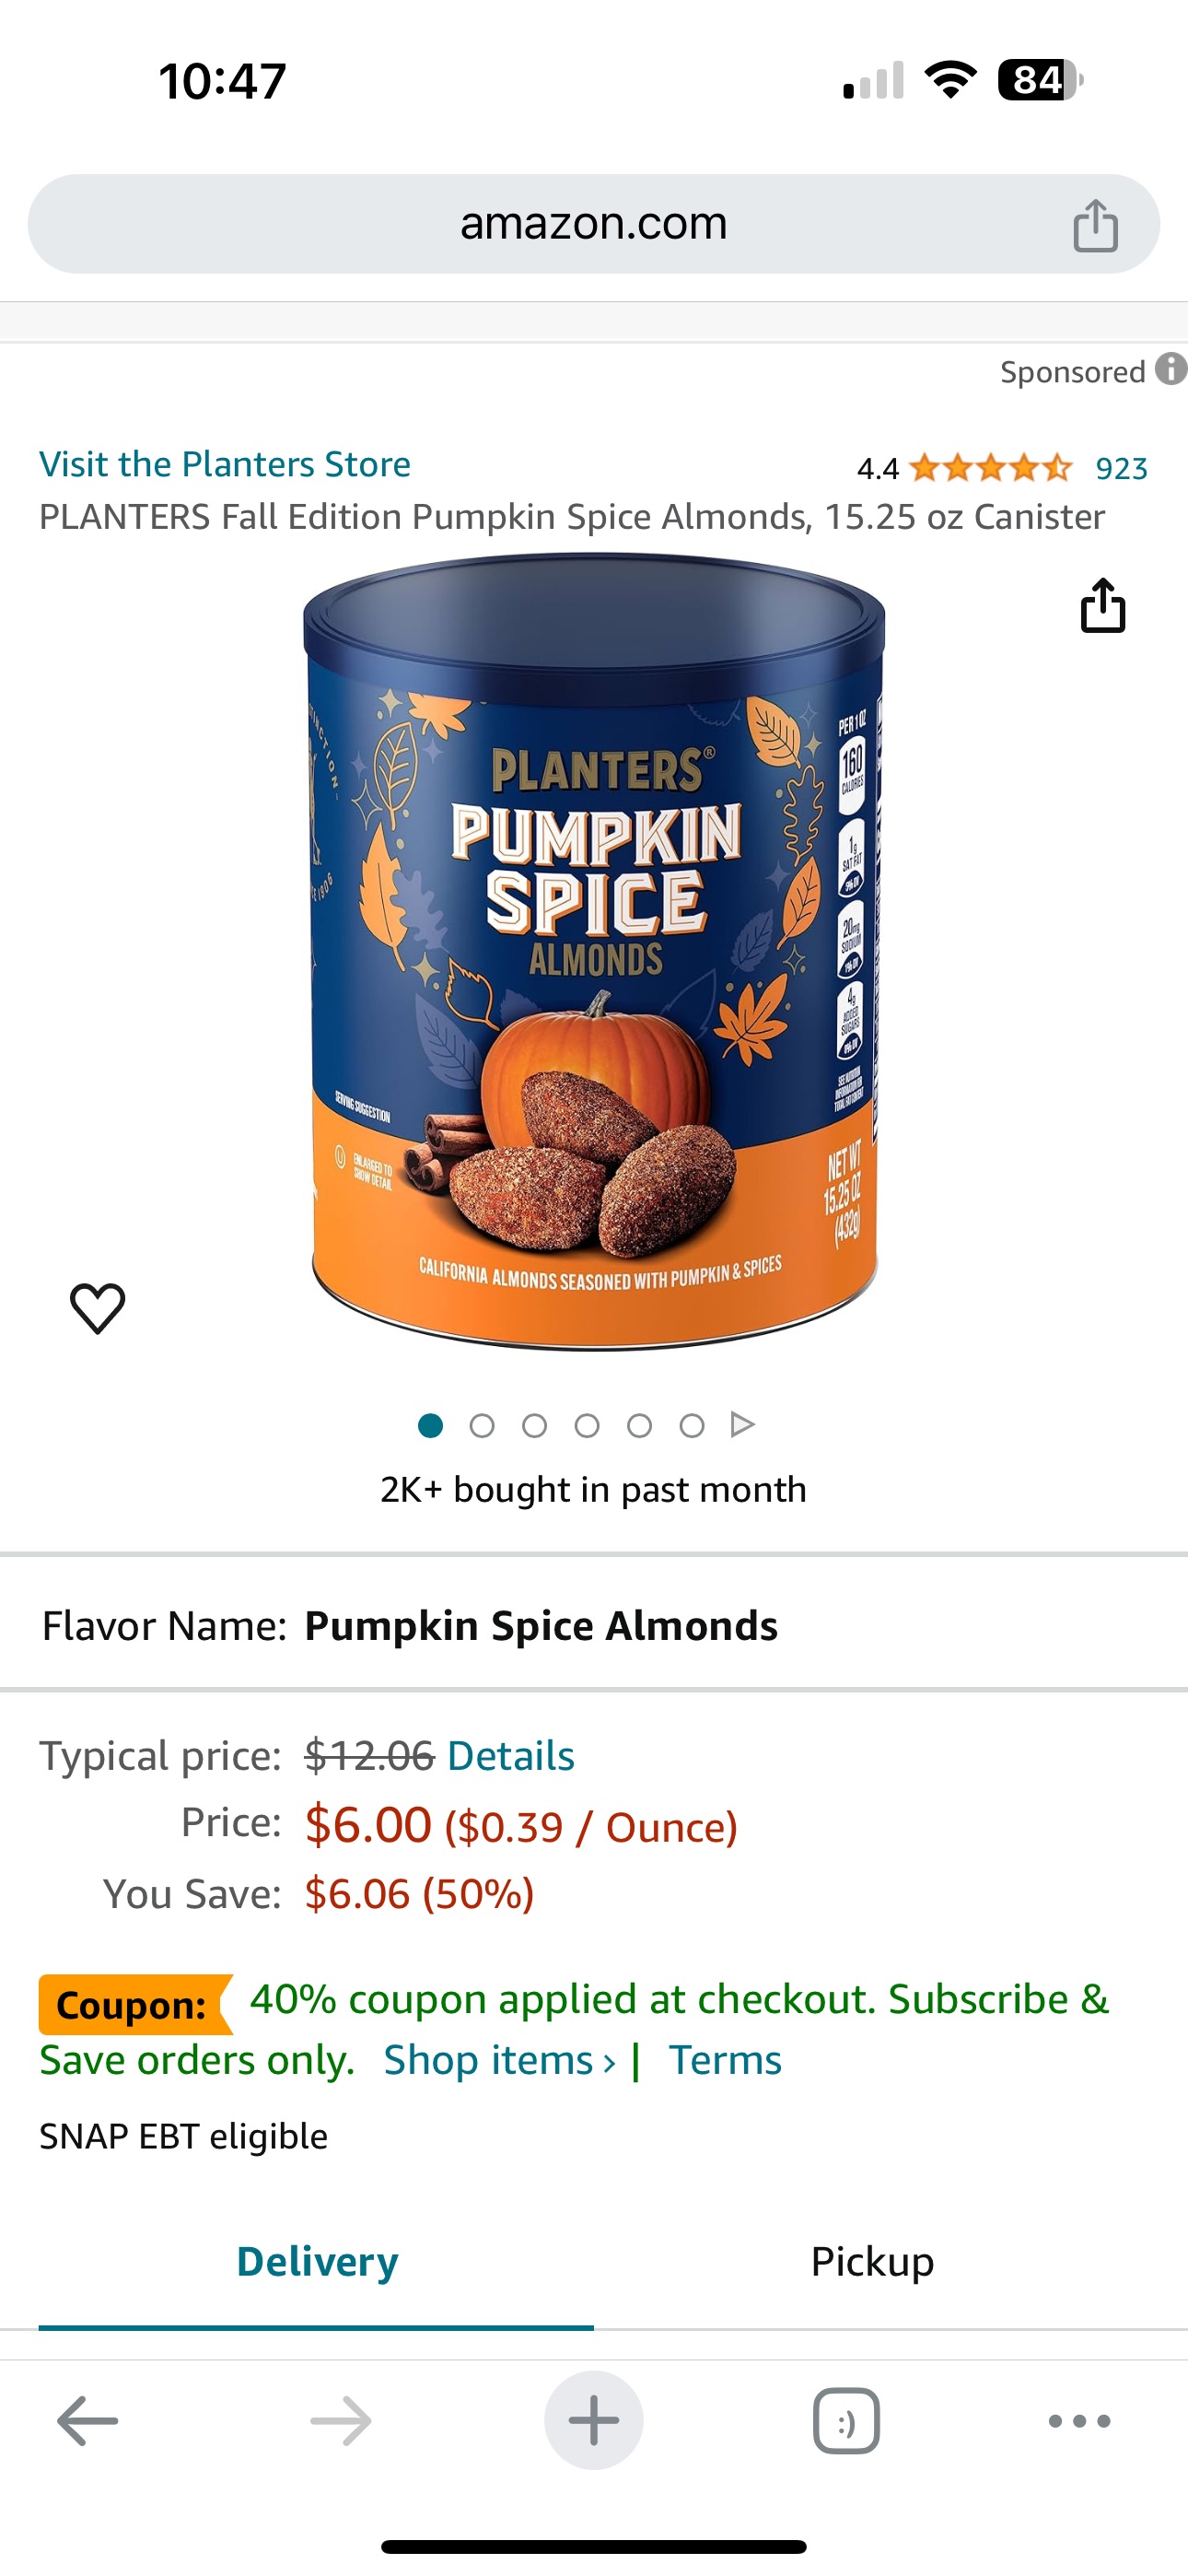 Amazon.com : PLANTERS Fall Edition Pumpkin Spice Almonds, 15.25 oz Canister : Everything Else辣南瓜杏仁 续订